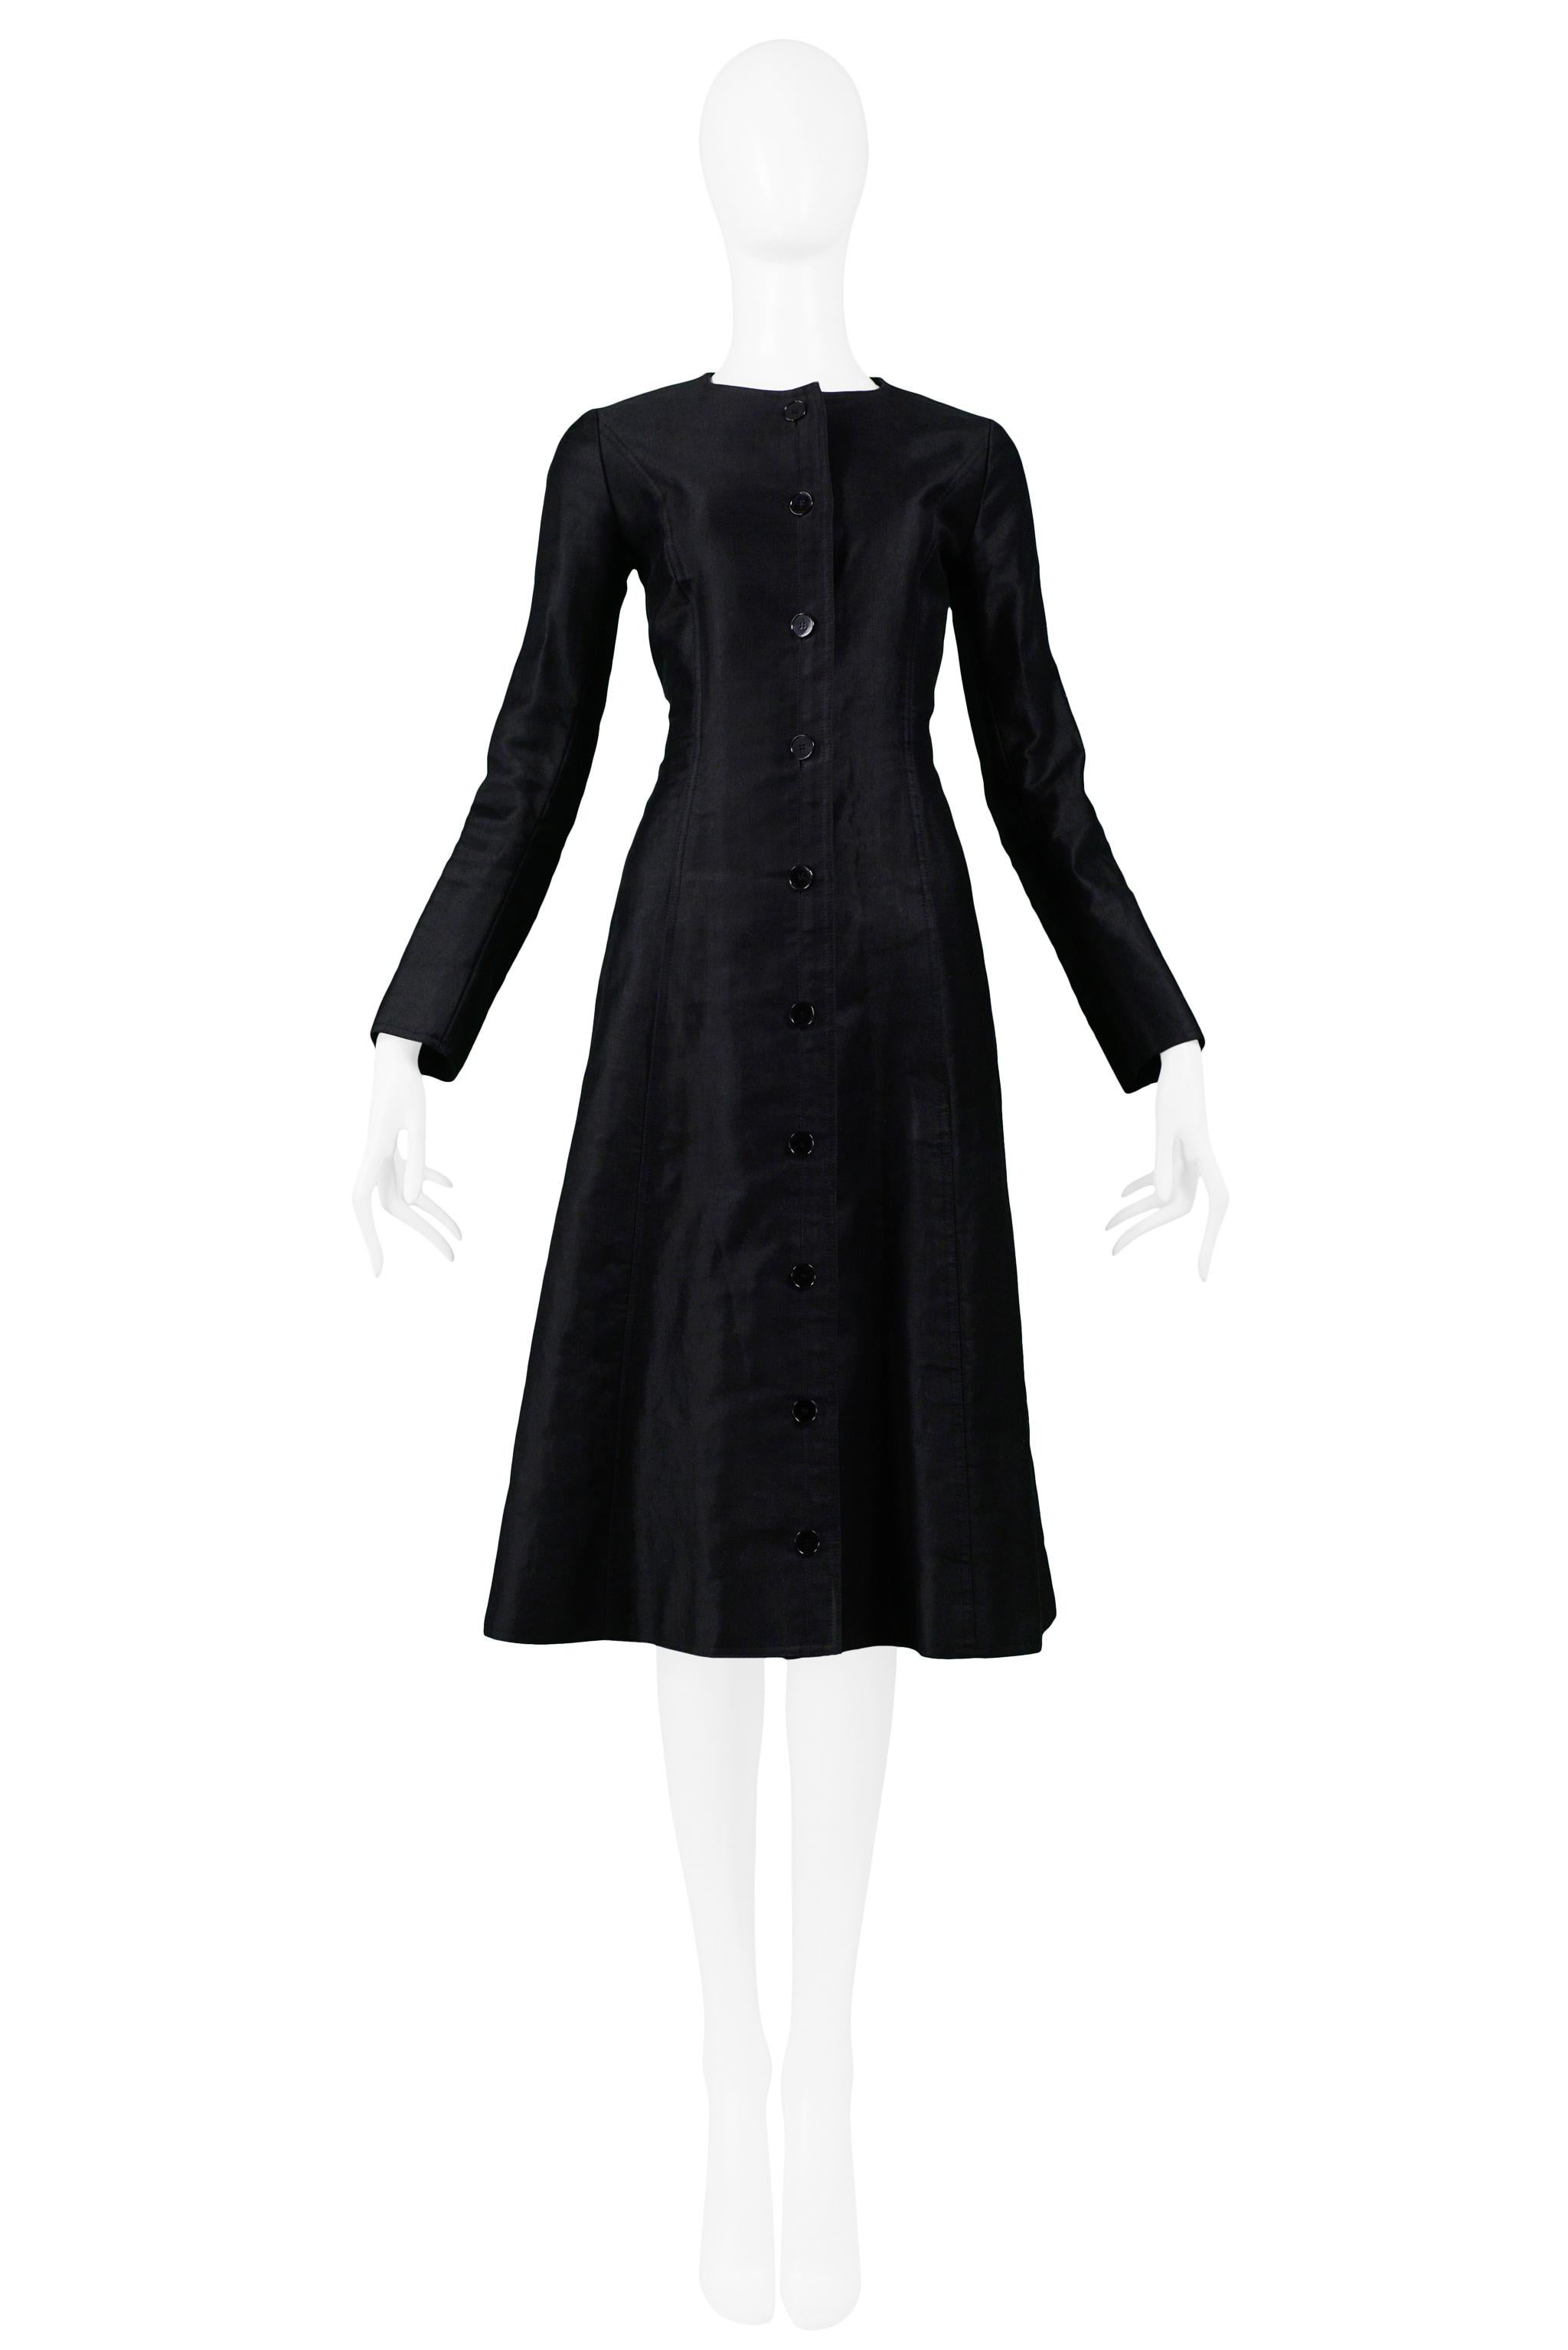 Resurrection Vintage is excited to offer a classic vintage Yves Saint Laurent black cotton sateen coat featuring a fitted body with a slightly a-line skirt, long sleeves, and black buttons.

Yves Saint Laurent
Size 36
Cotton Sateen 
Excellent